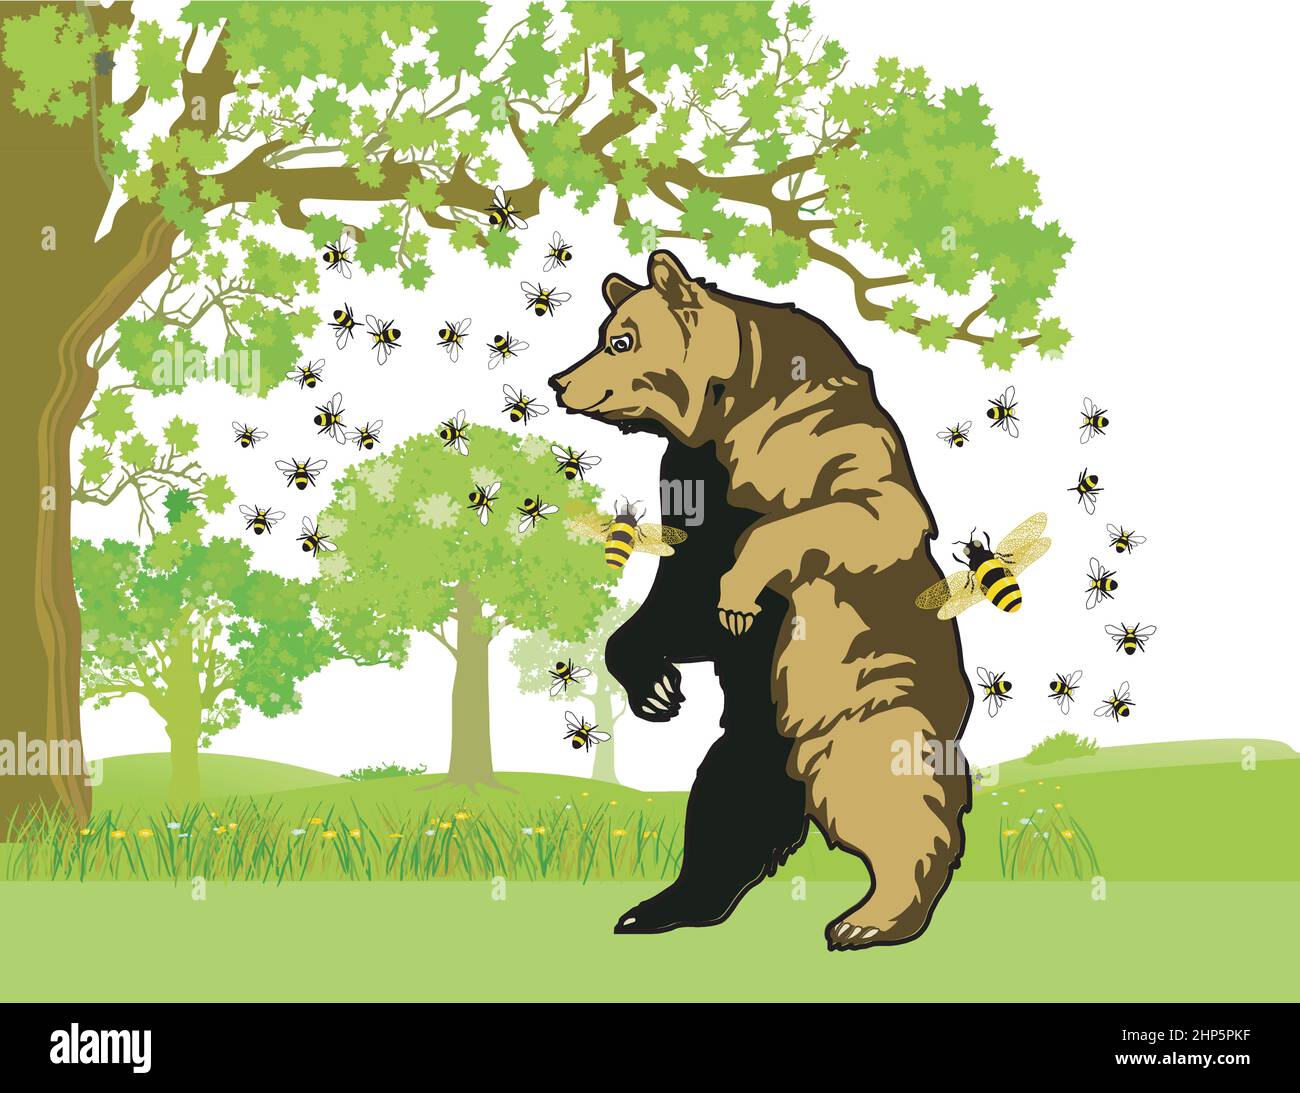 a bear with bees who wants honey, illustration Stock Vector